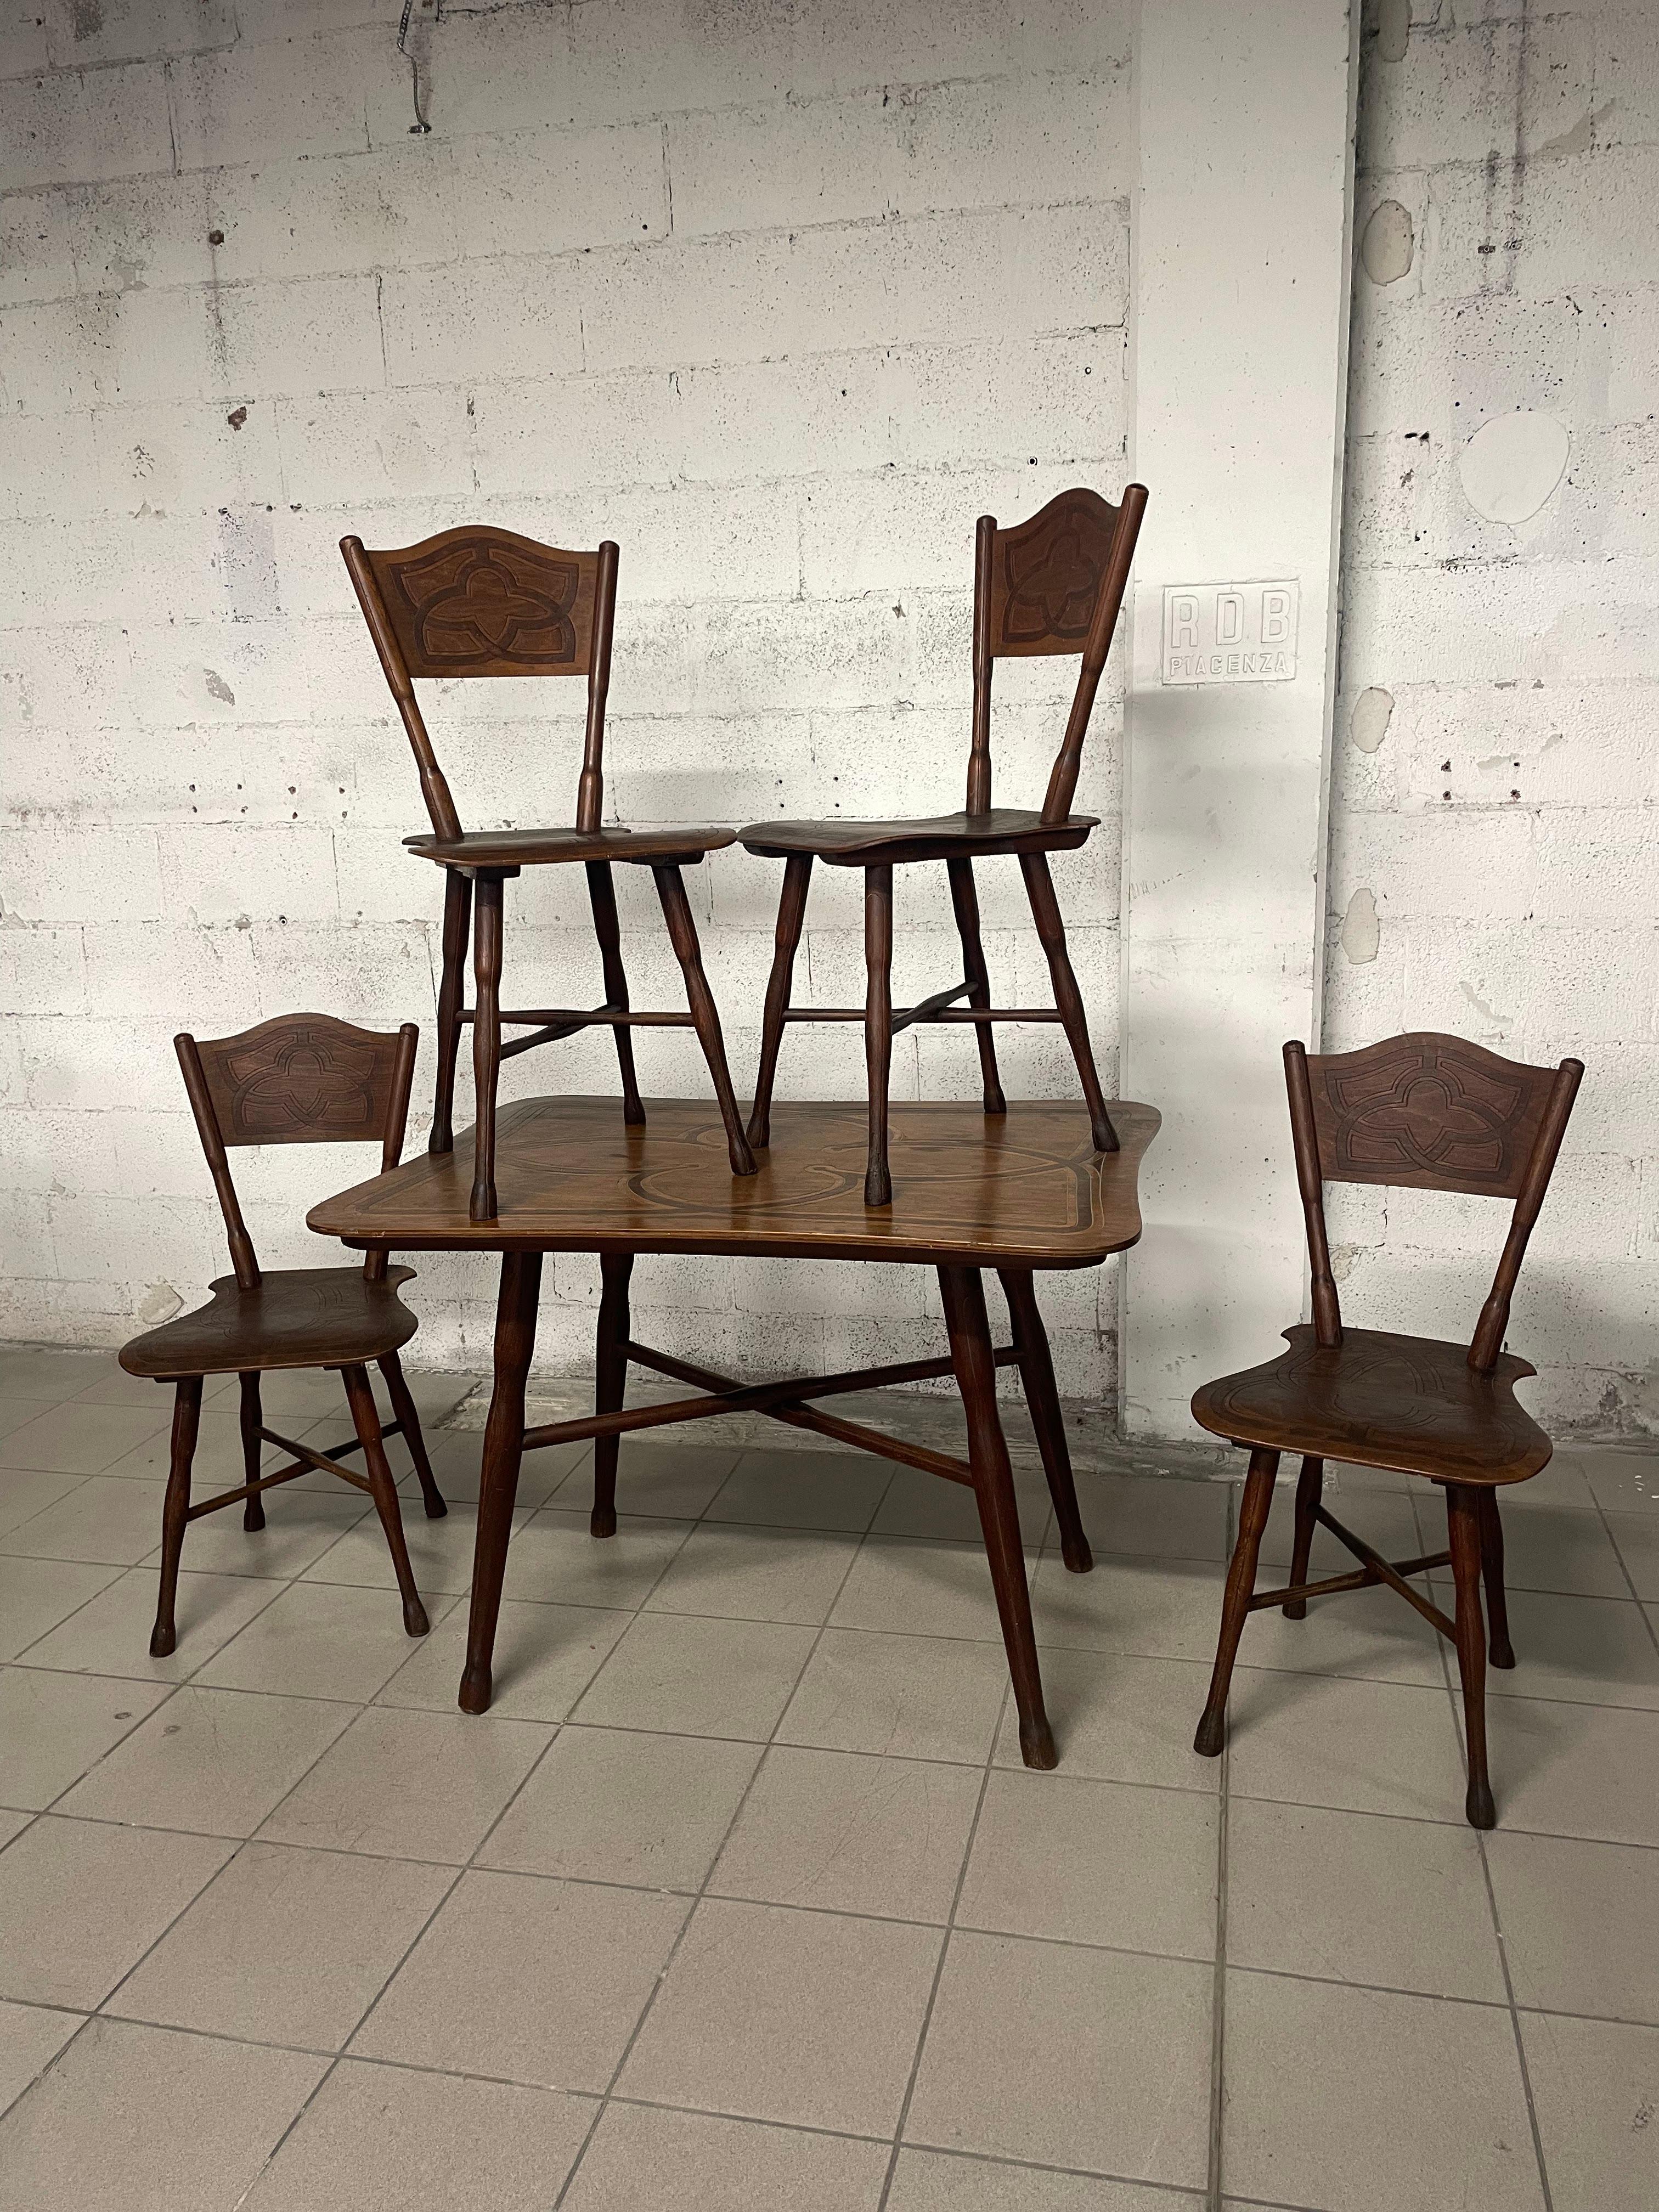 Set of 4 Thonet chairs and table, Austria, first half of 20th century For Sale 3